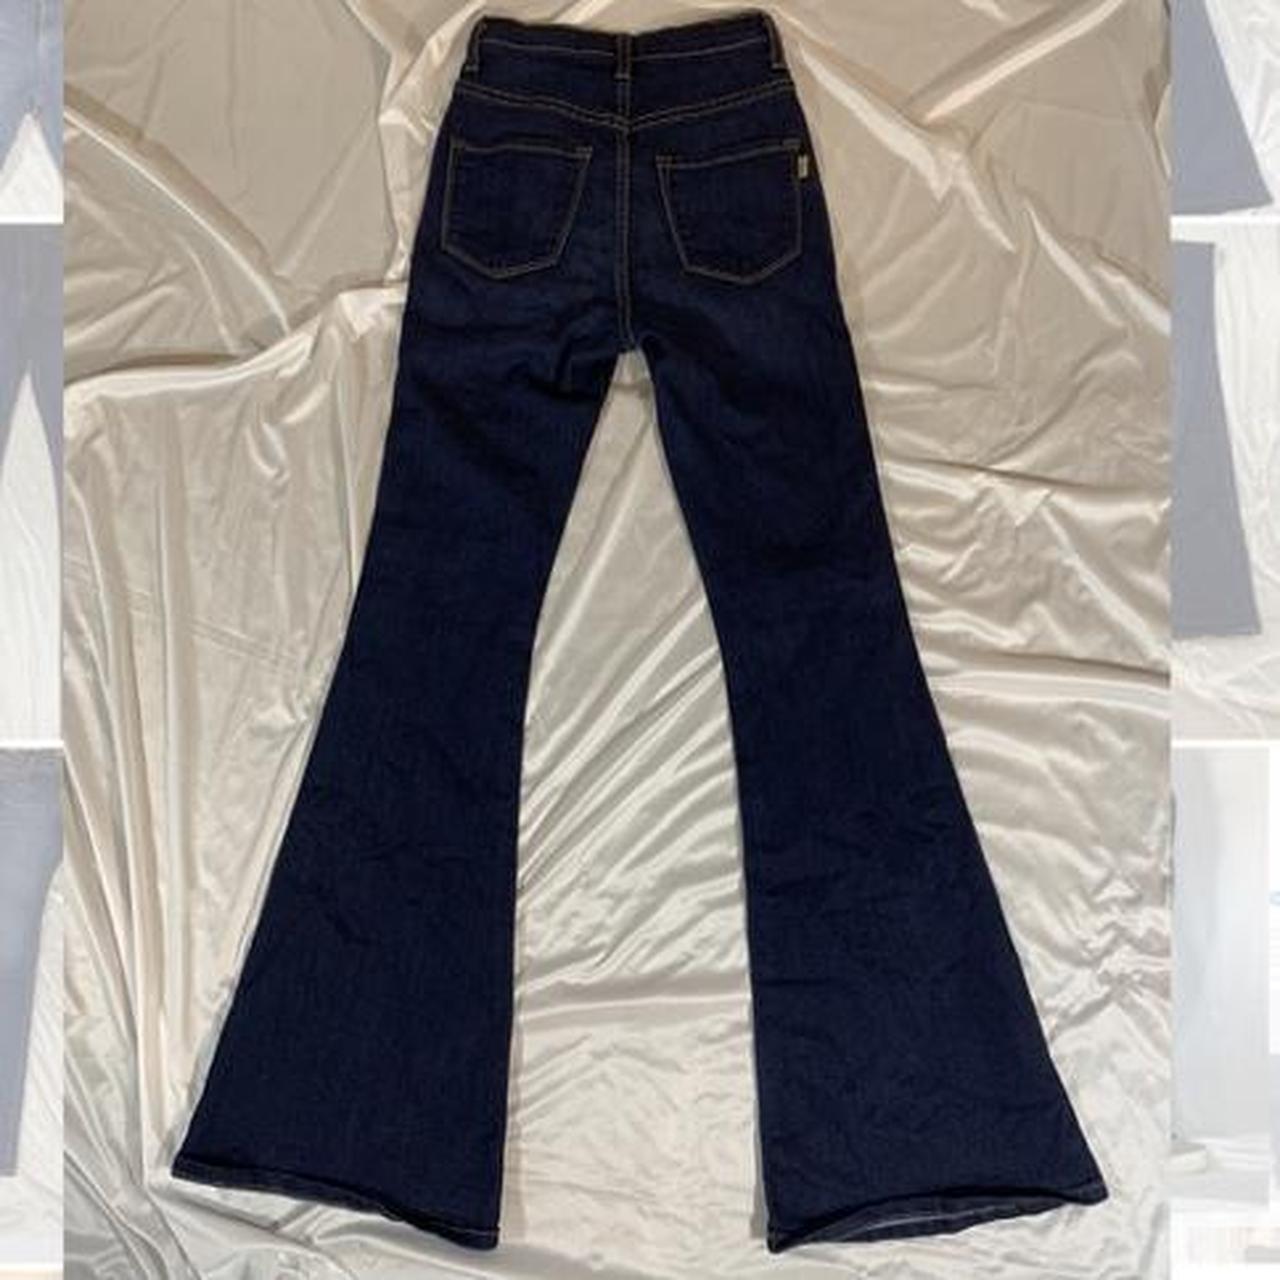 Product Image 3 - Navy high rise flare jeans